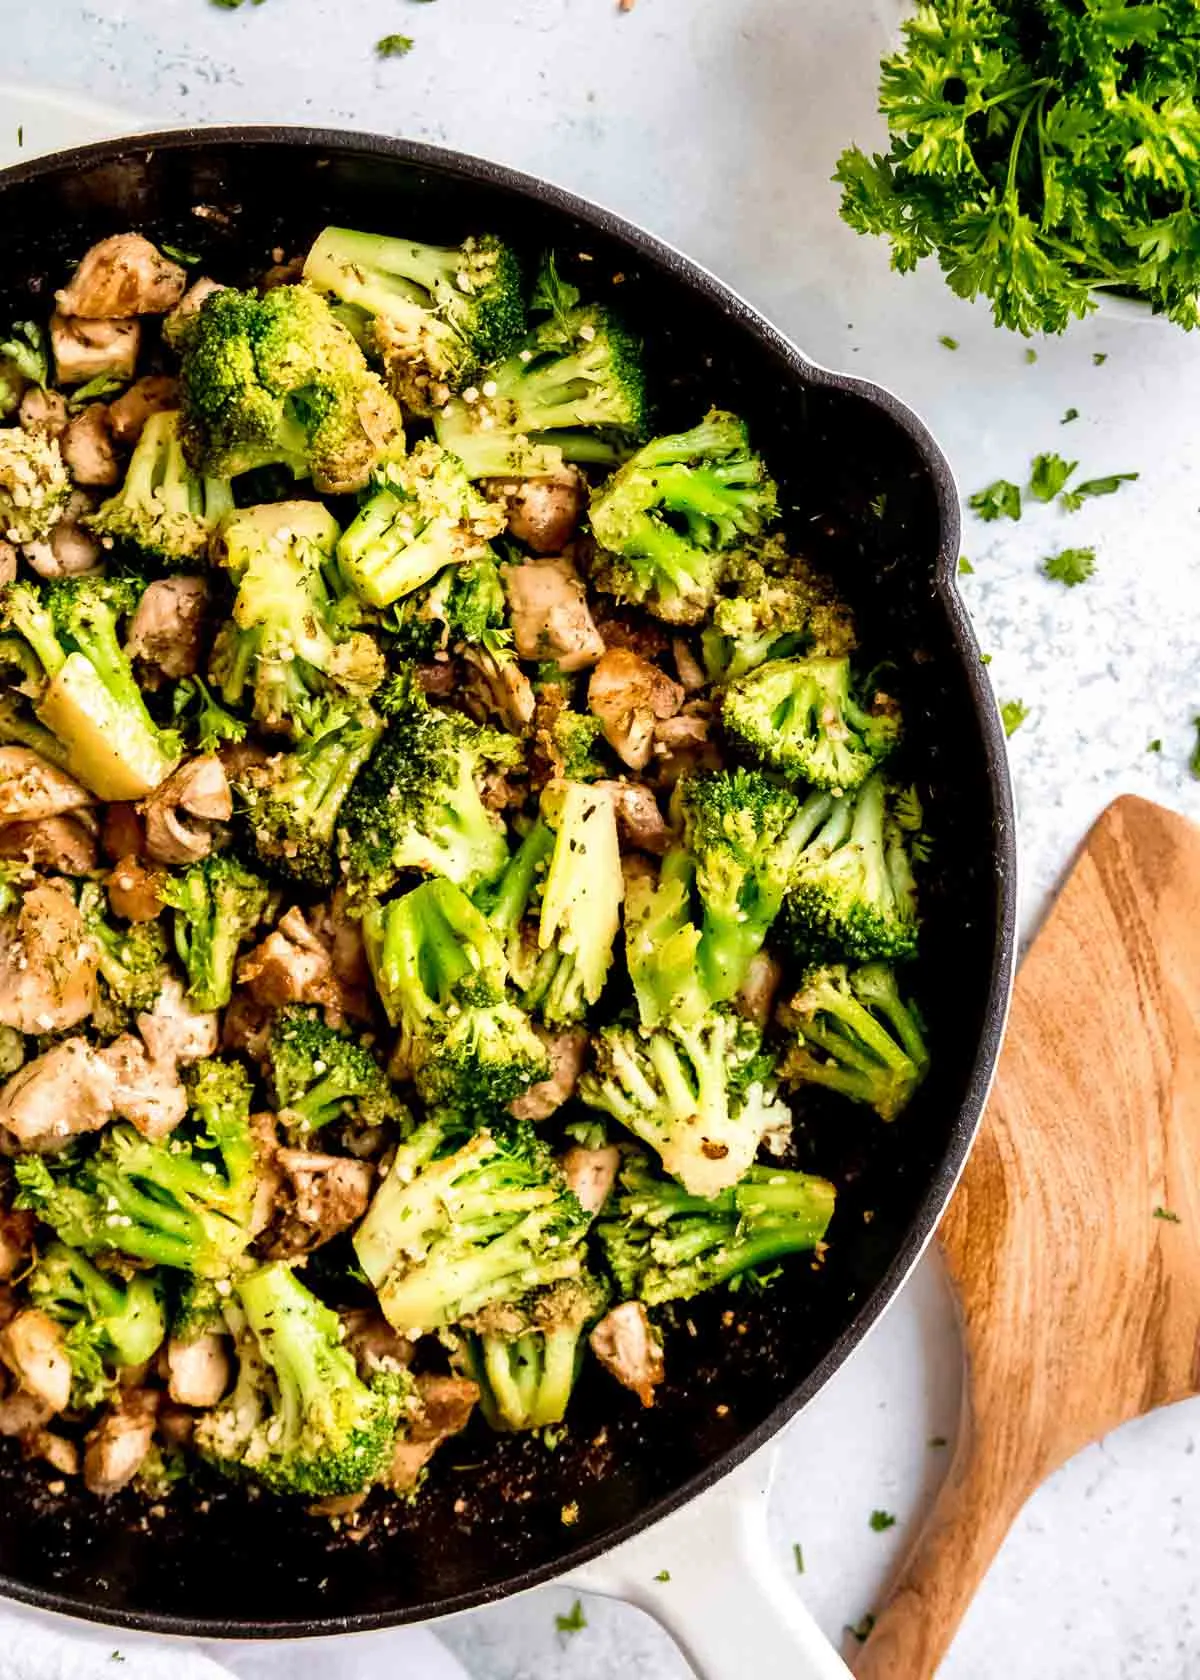 Chicken and Broccoli Skillet cooked in a black cast iron skillet - one of the recipes for this week's healthy weekly meal plan